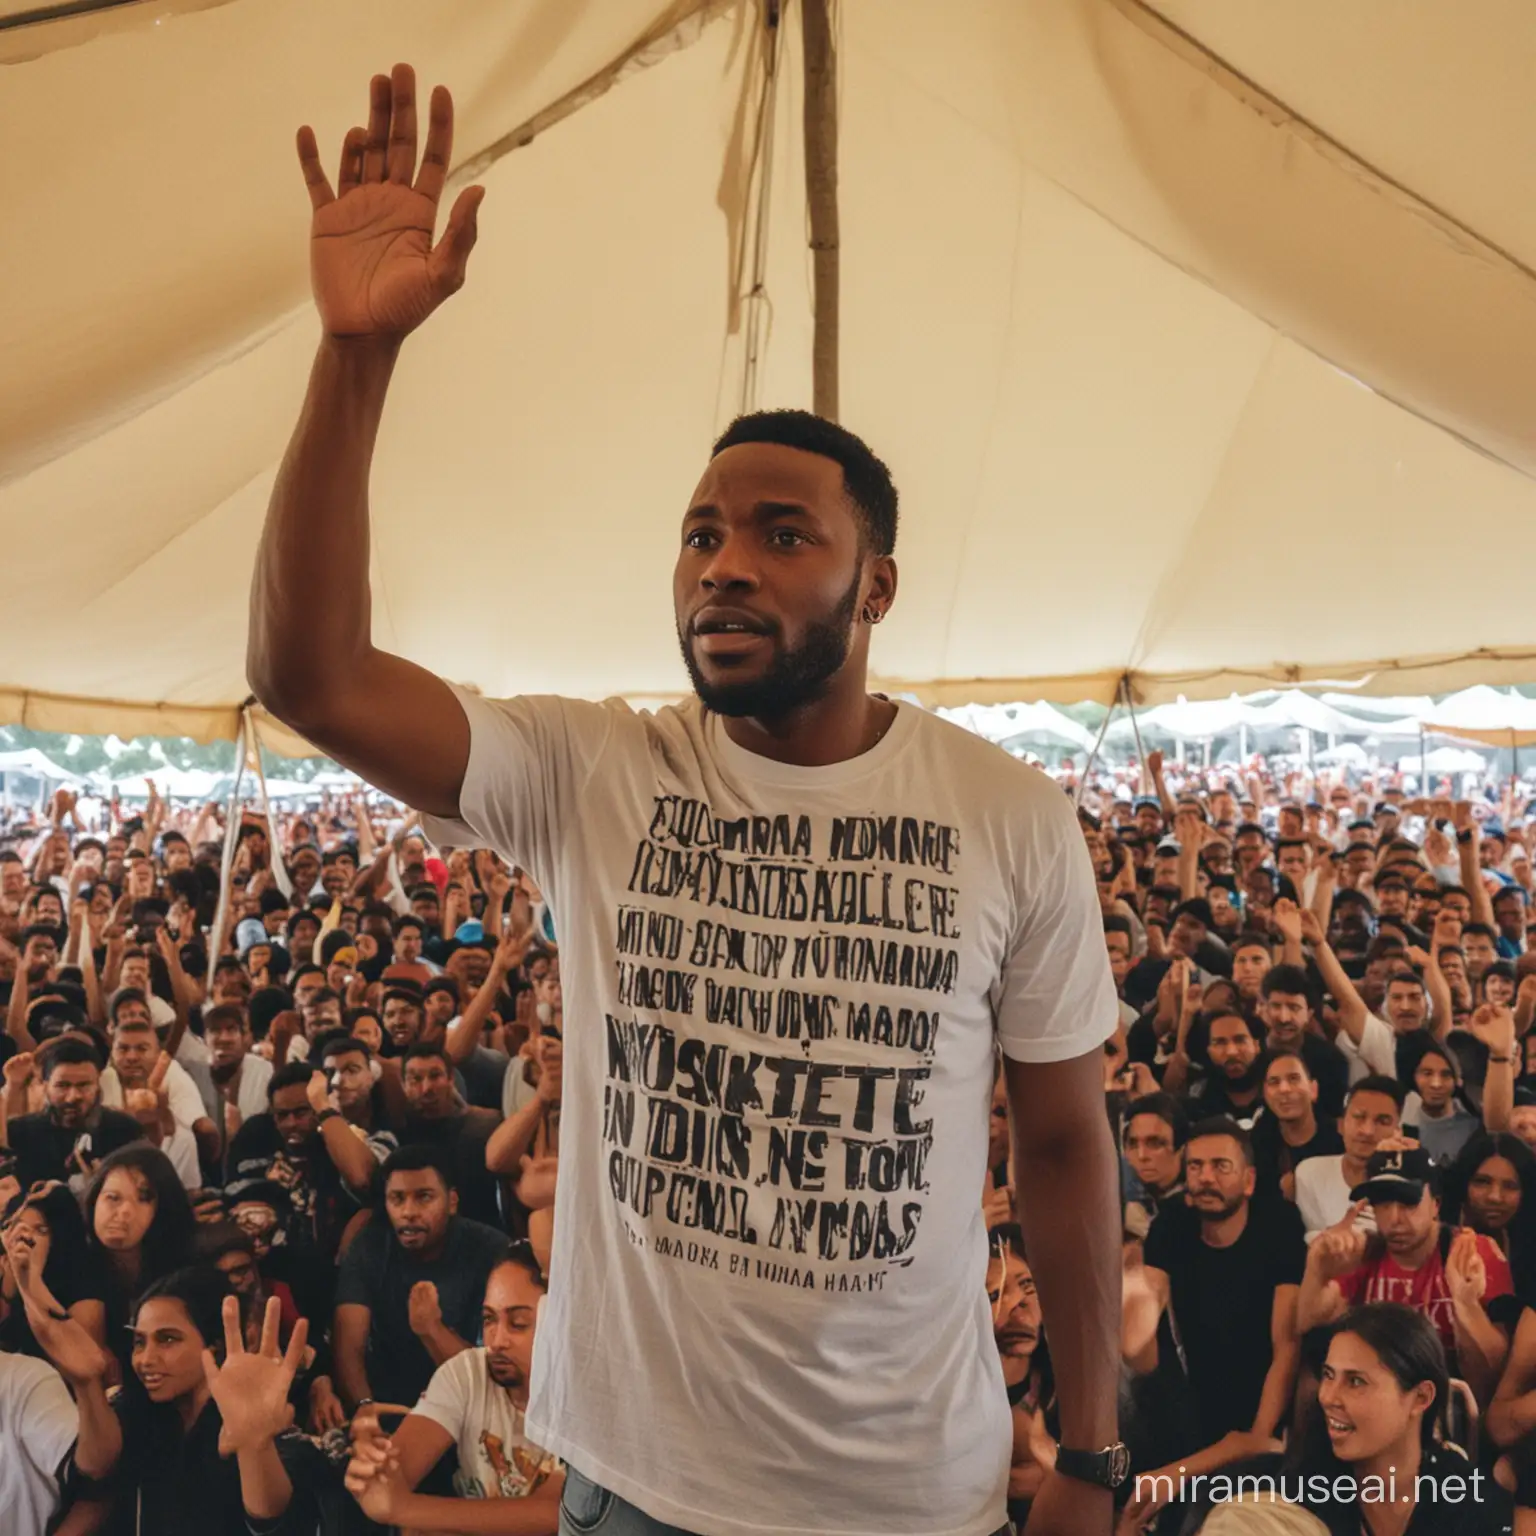 A man wearing a t-shirt written TUMANA NIKULETEE standing in a tent full of people waving at people. He must be a black man